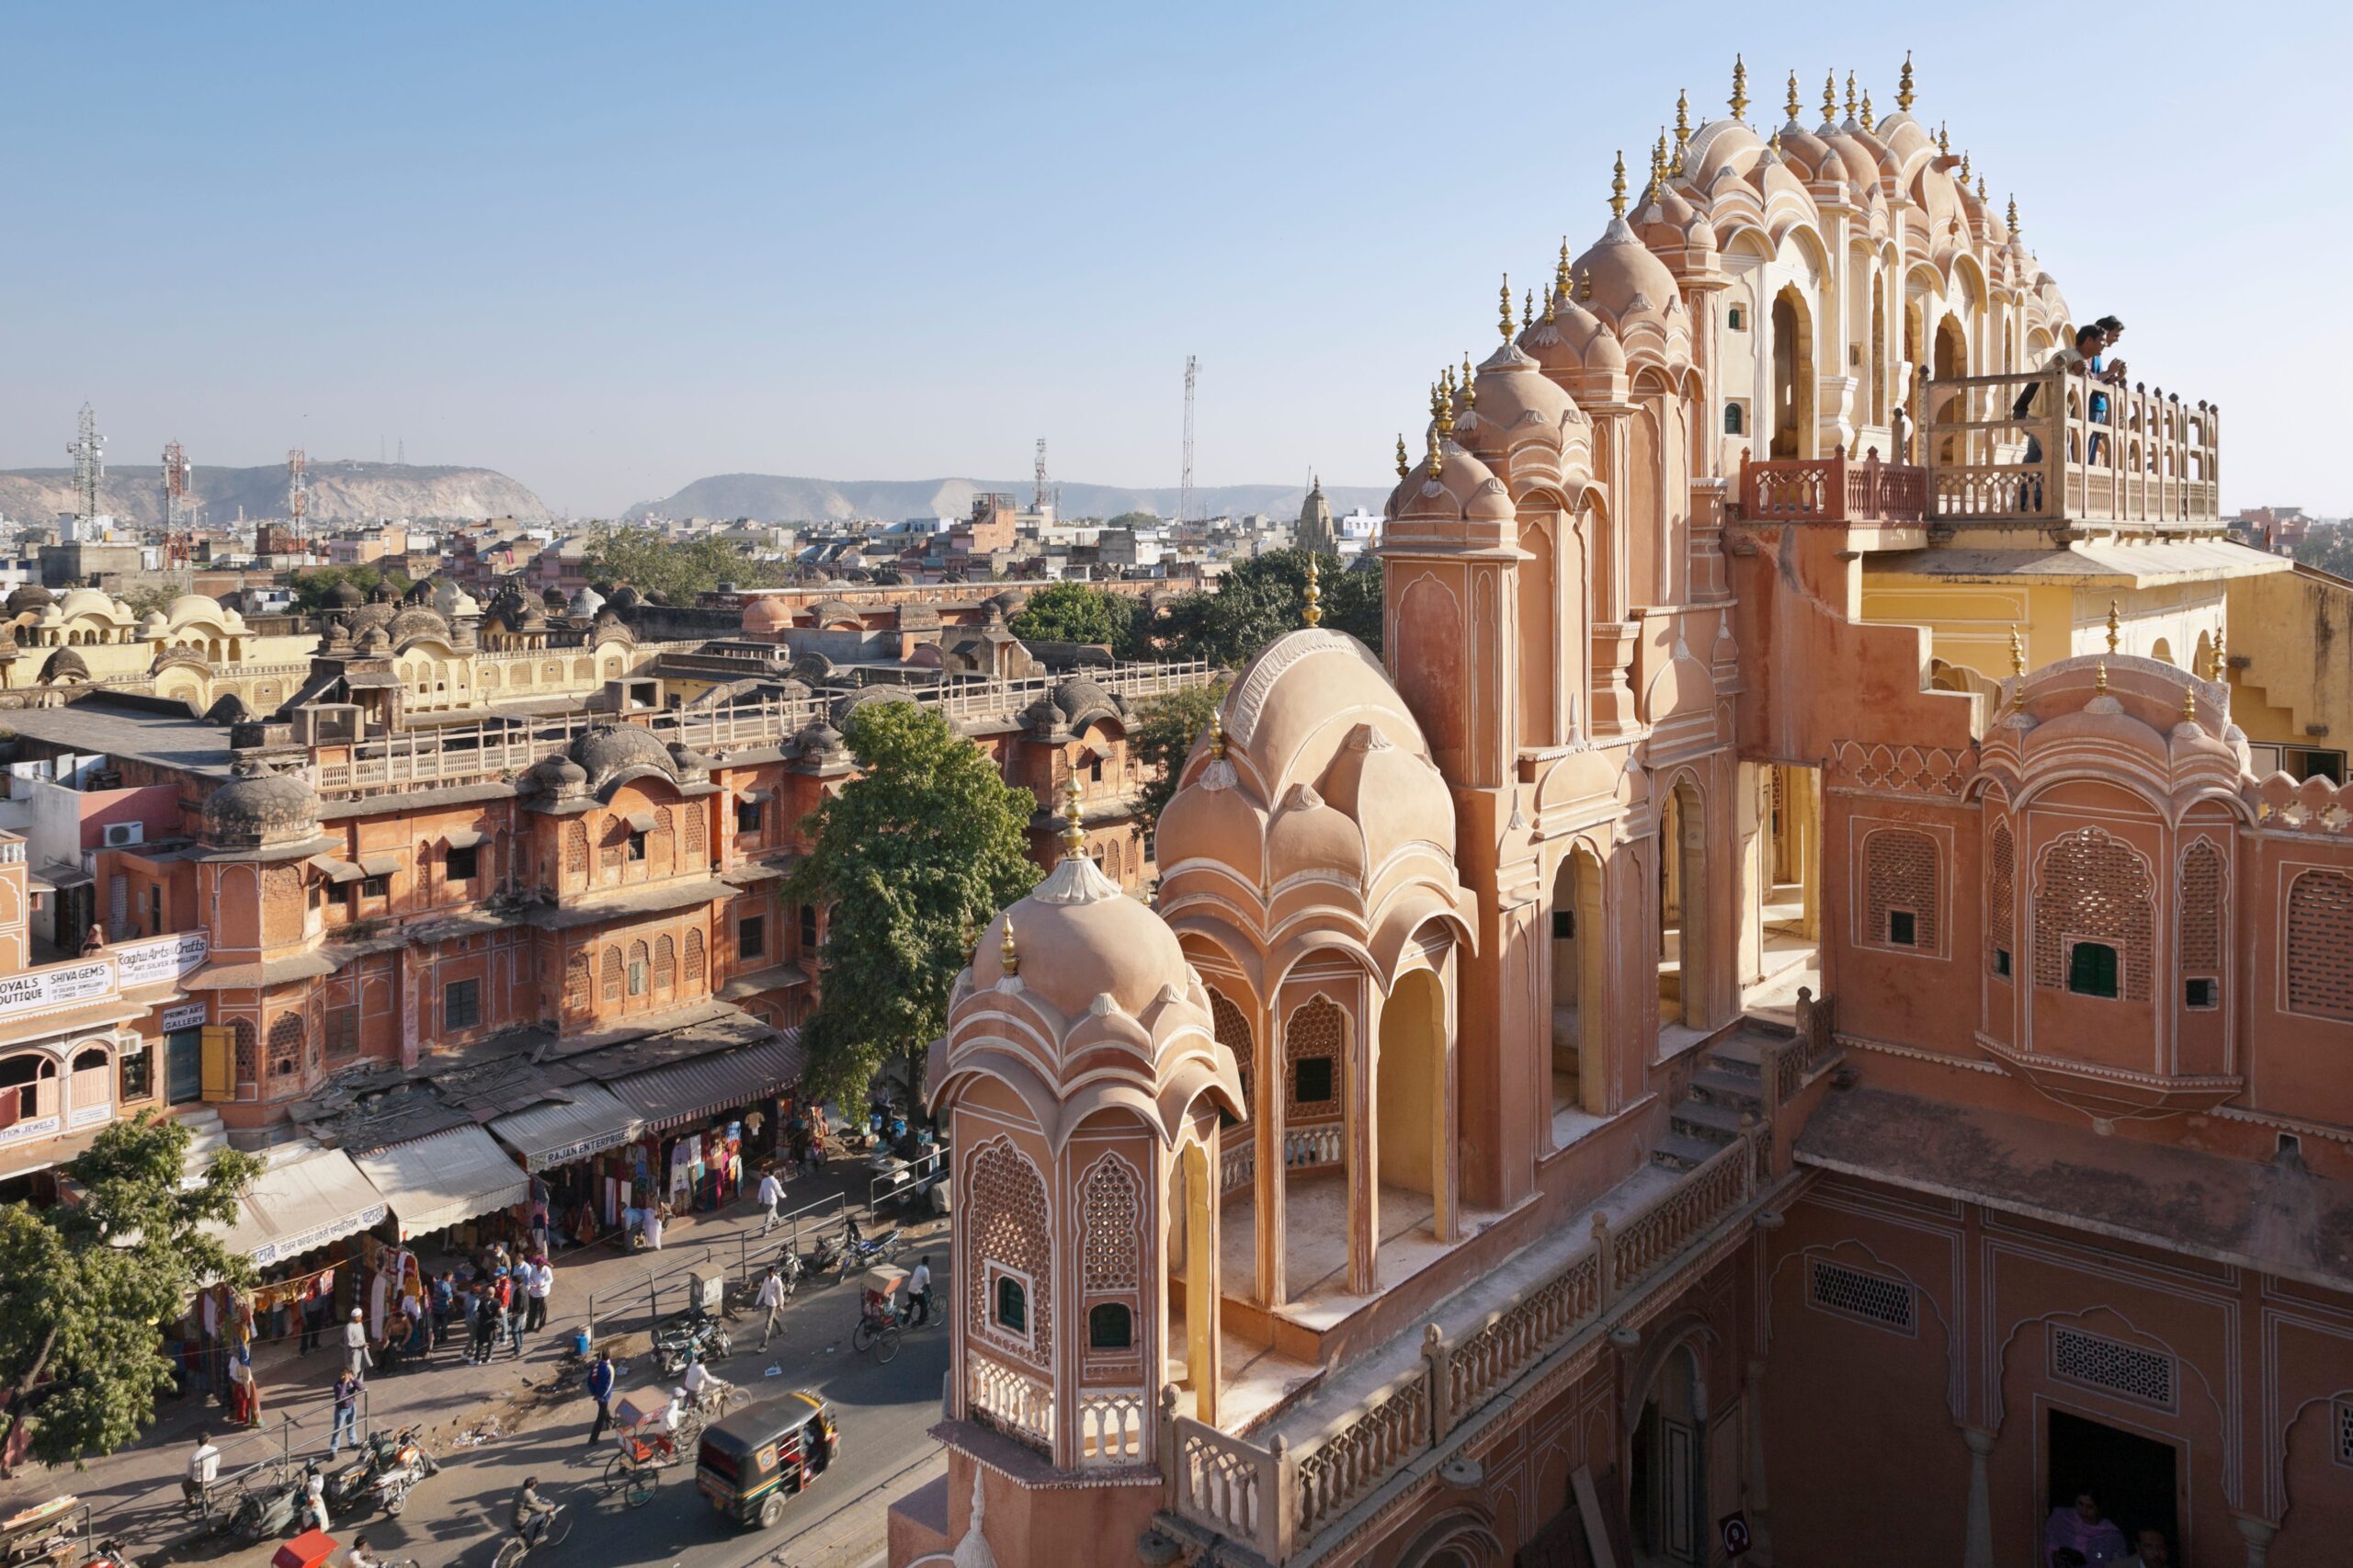 A city view of Jaipur, India